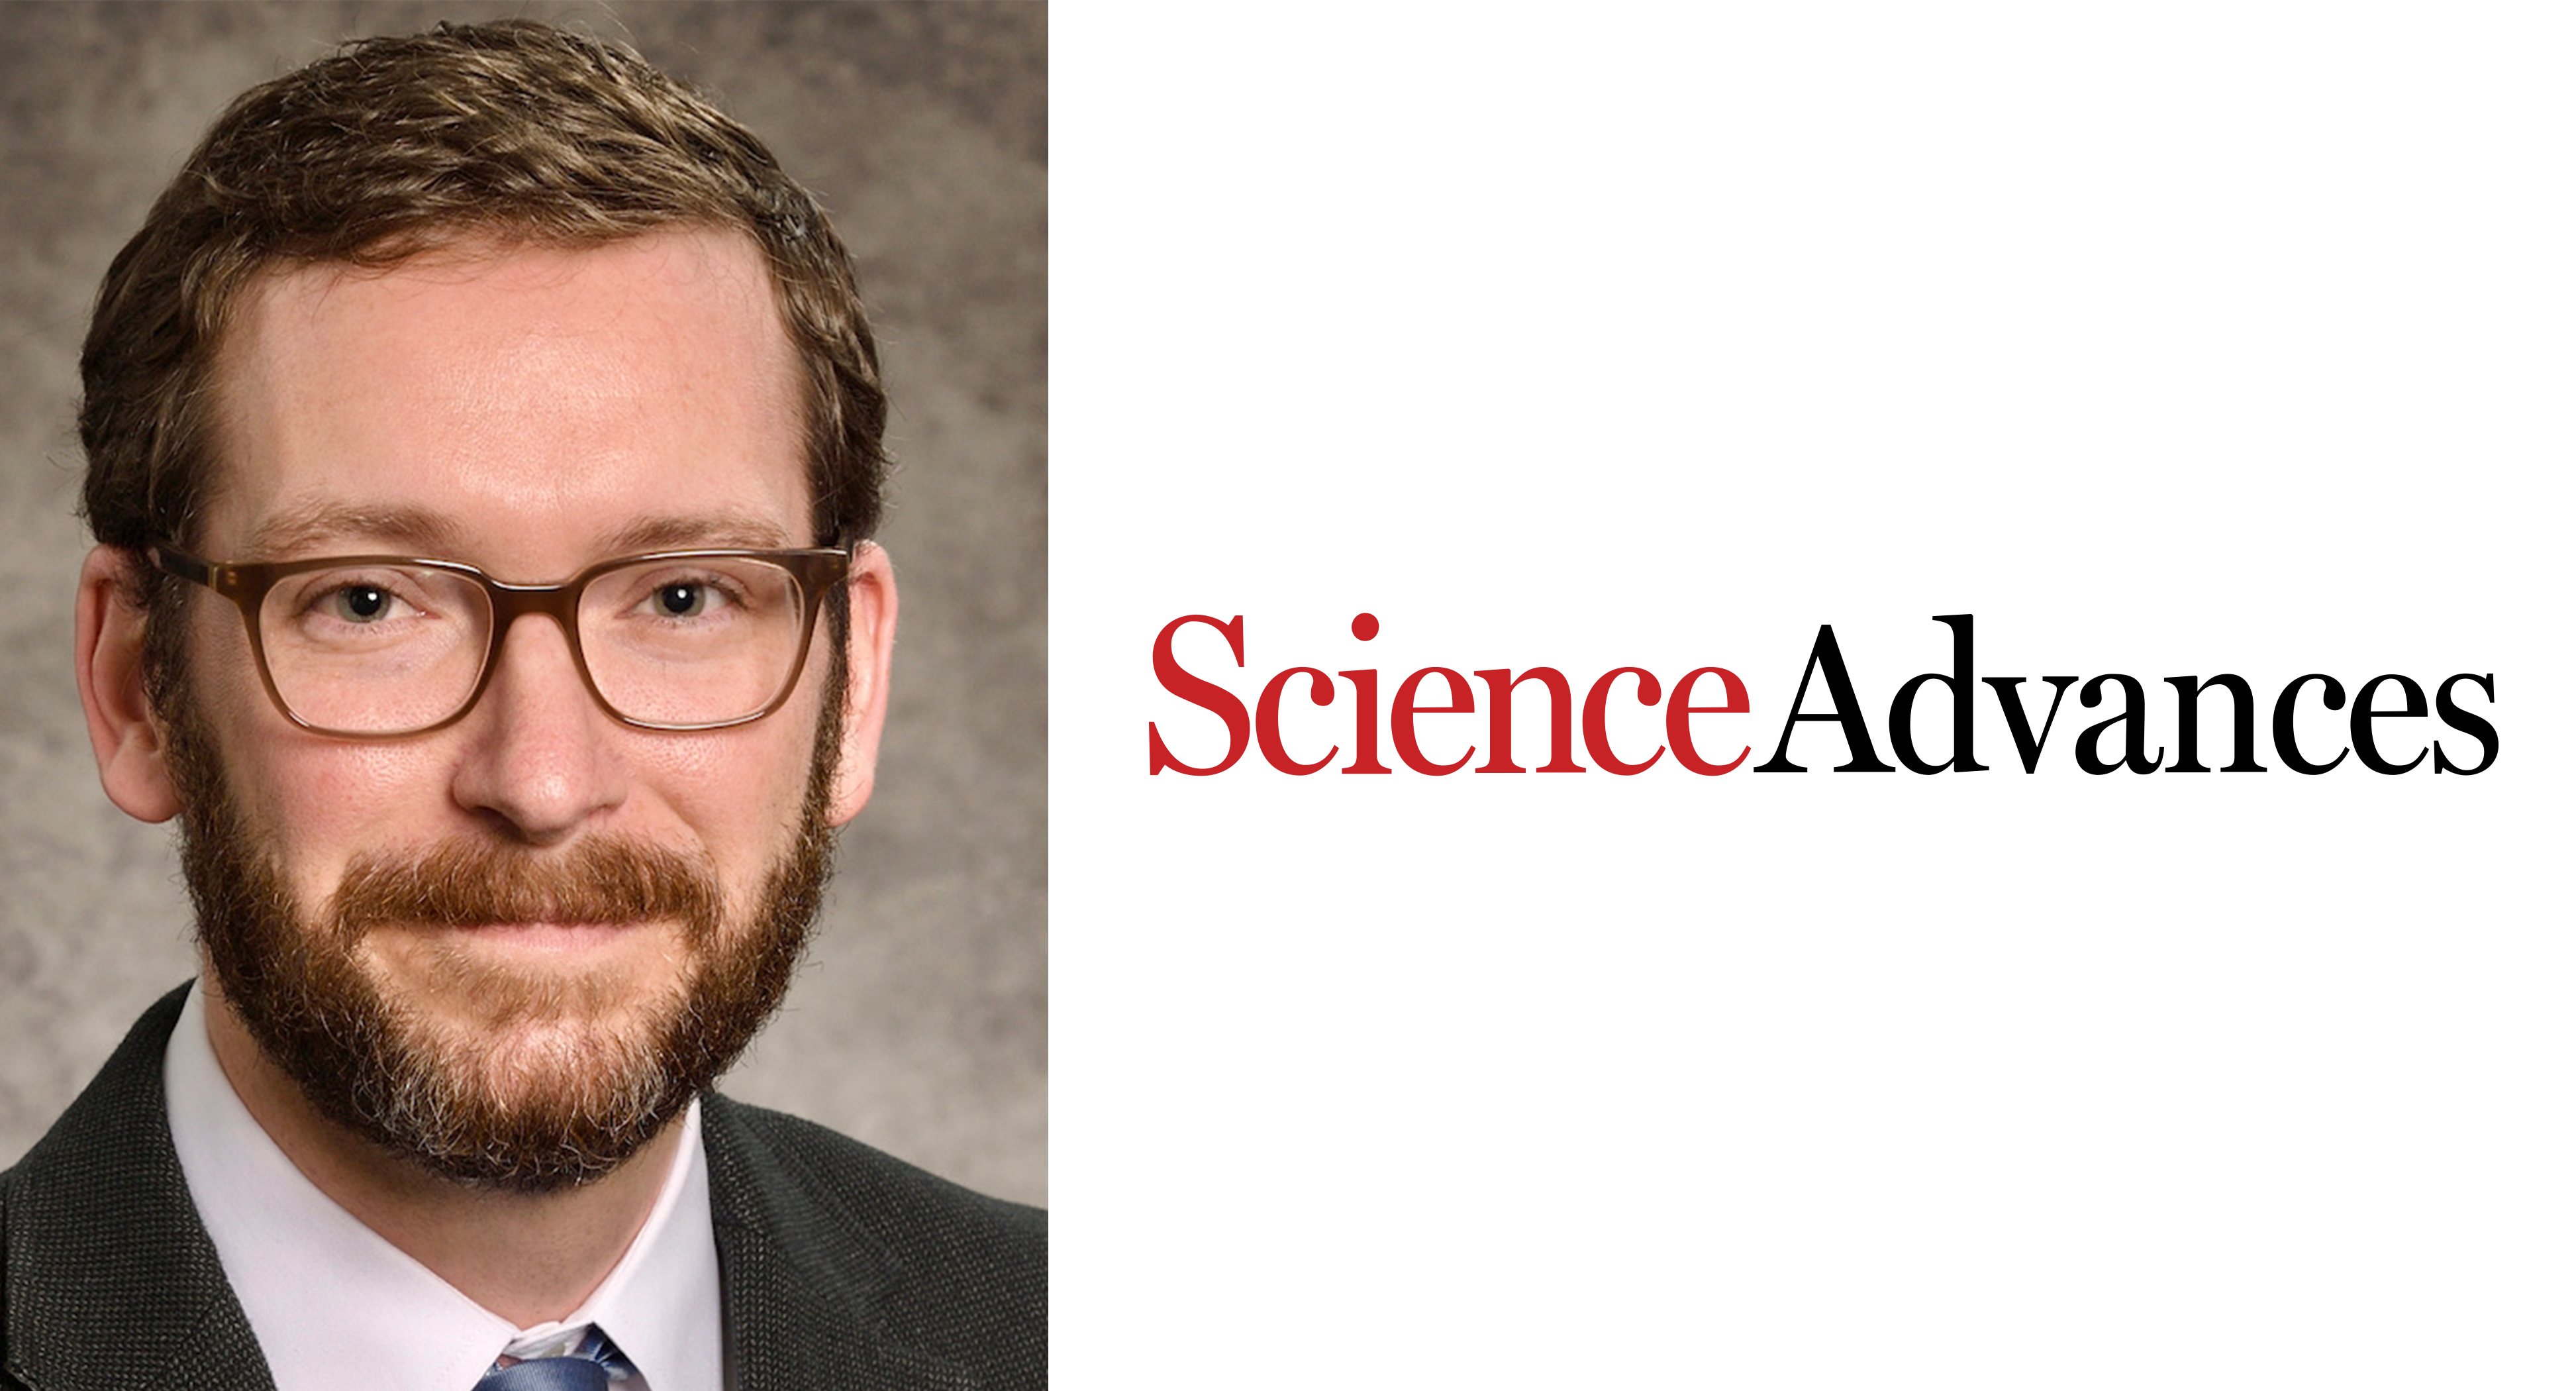 Ryan Purcell headshot and Science Advances logo